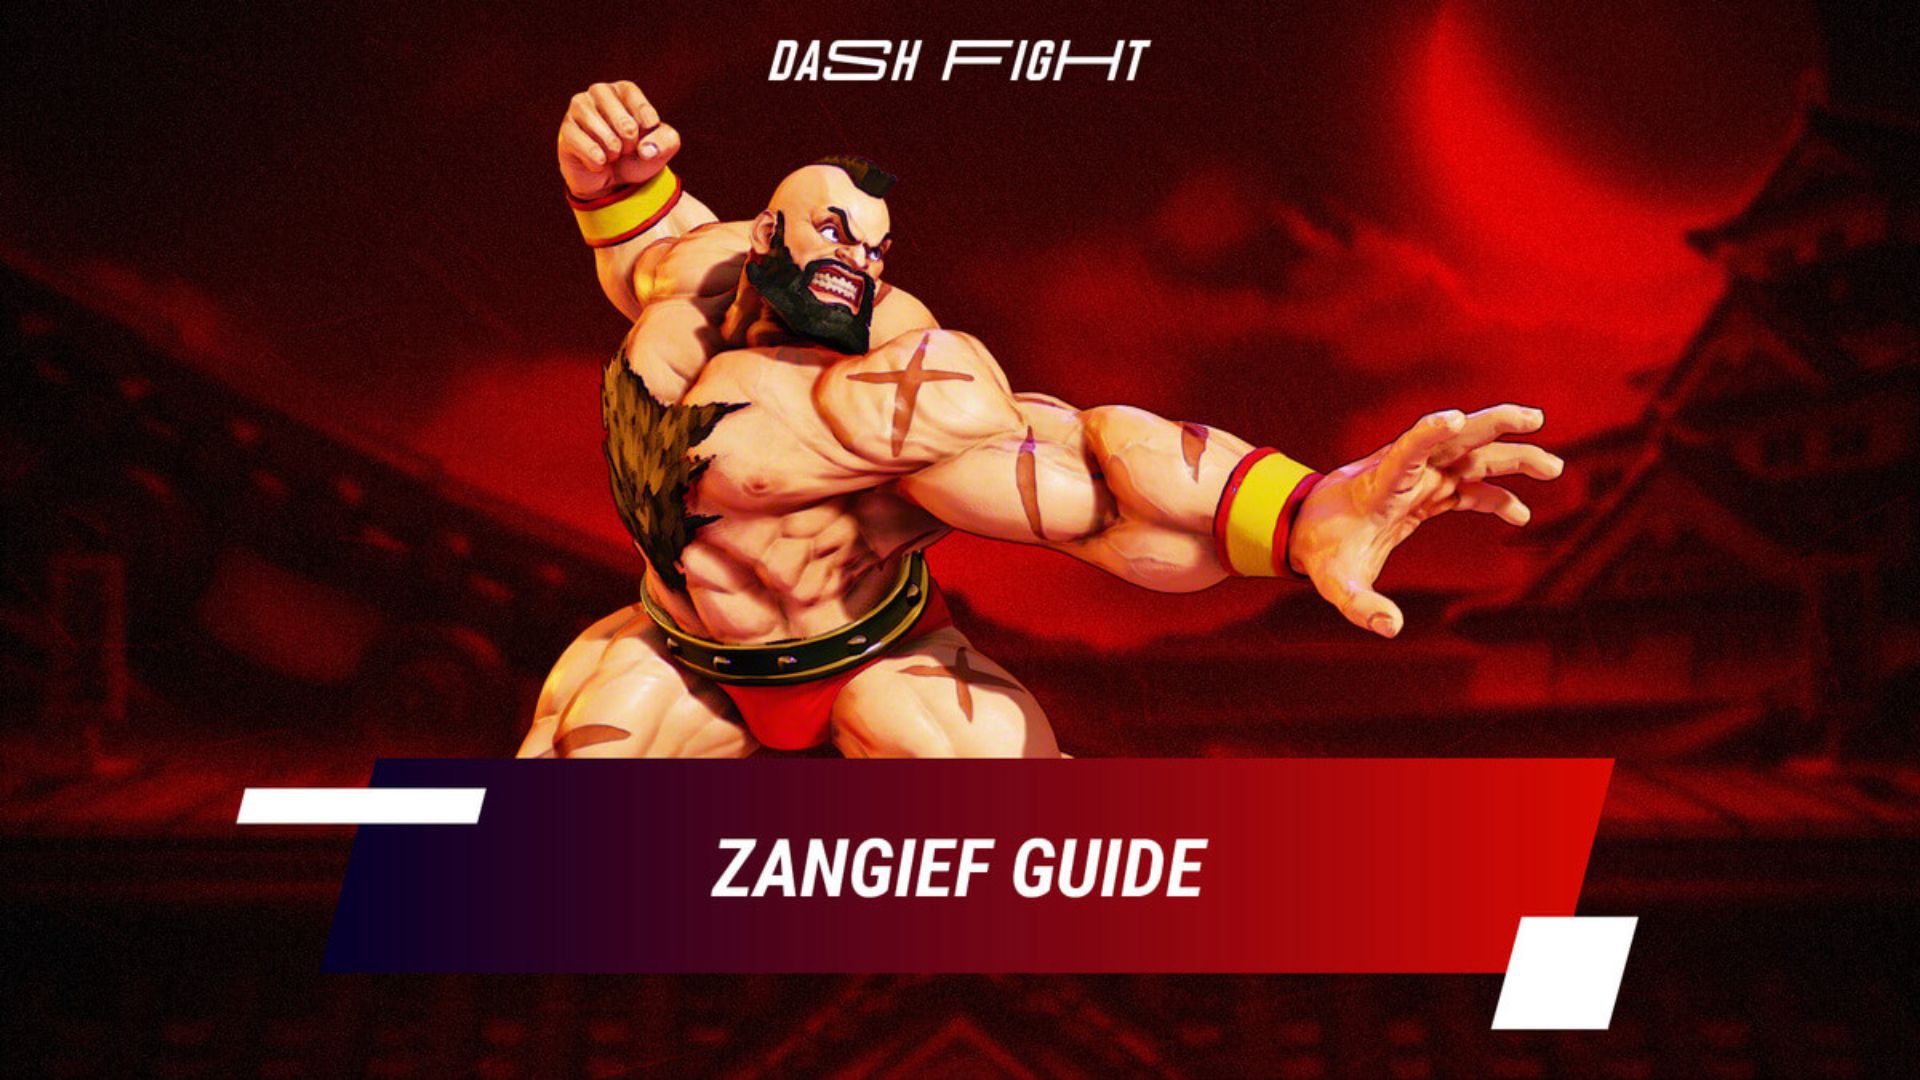 Street Fighter V Zangief Guide Combos And Moves List Dashfight 7423